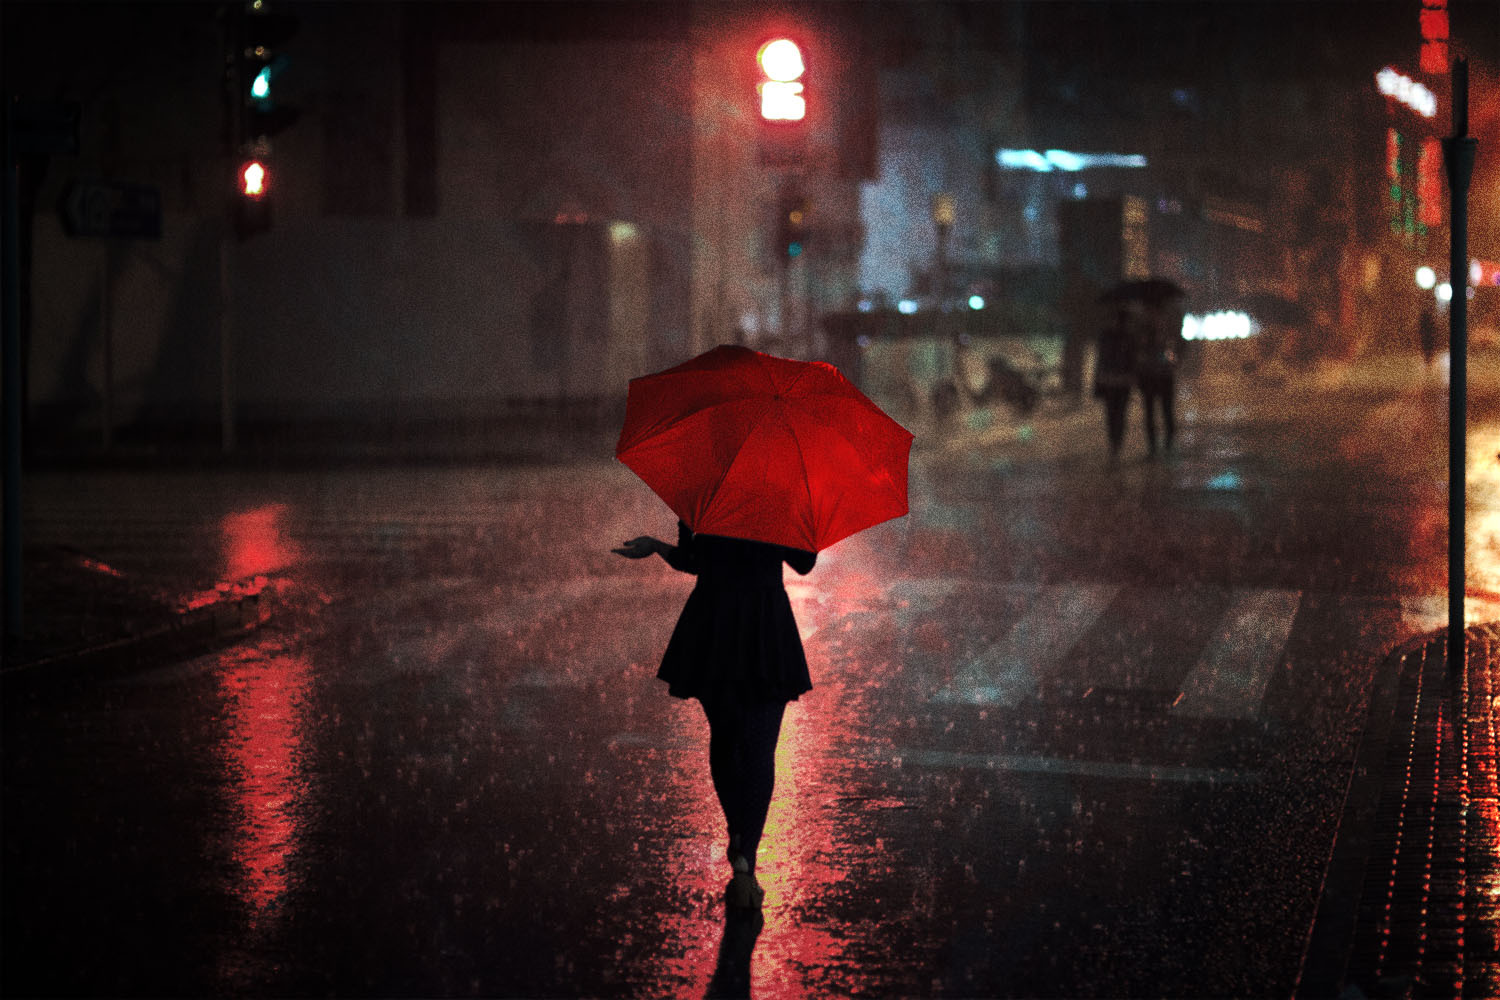 A woman in Shanghai, China appears in silhouette as she crosses a rainy street at night. She holds out her hand under a red umbrella